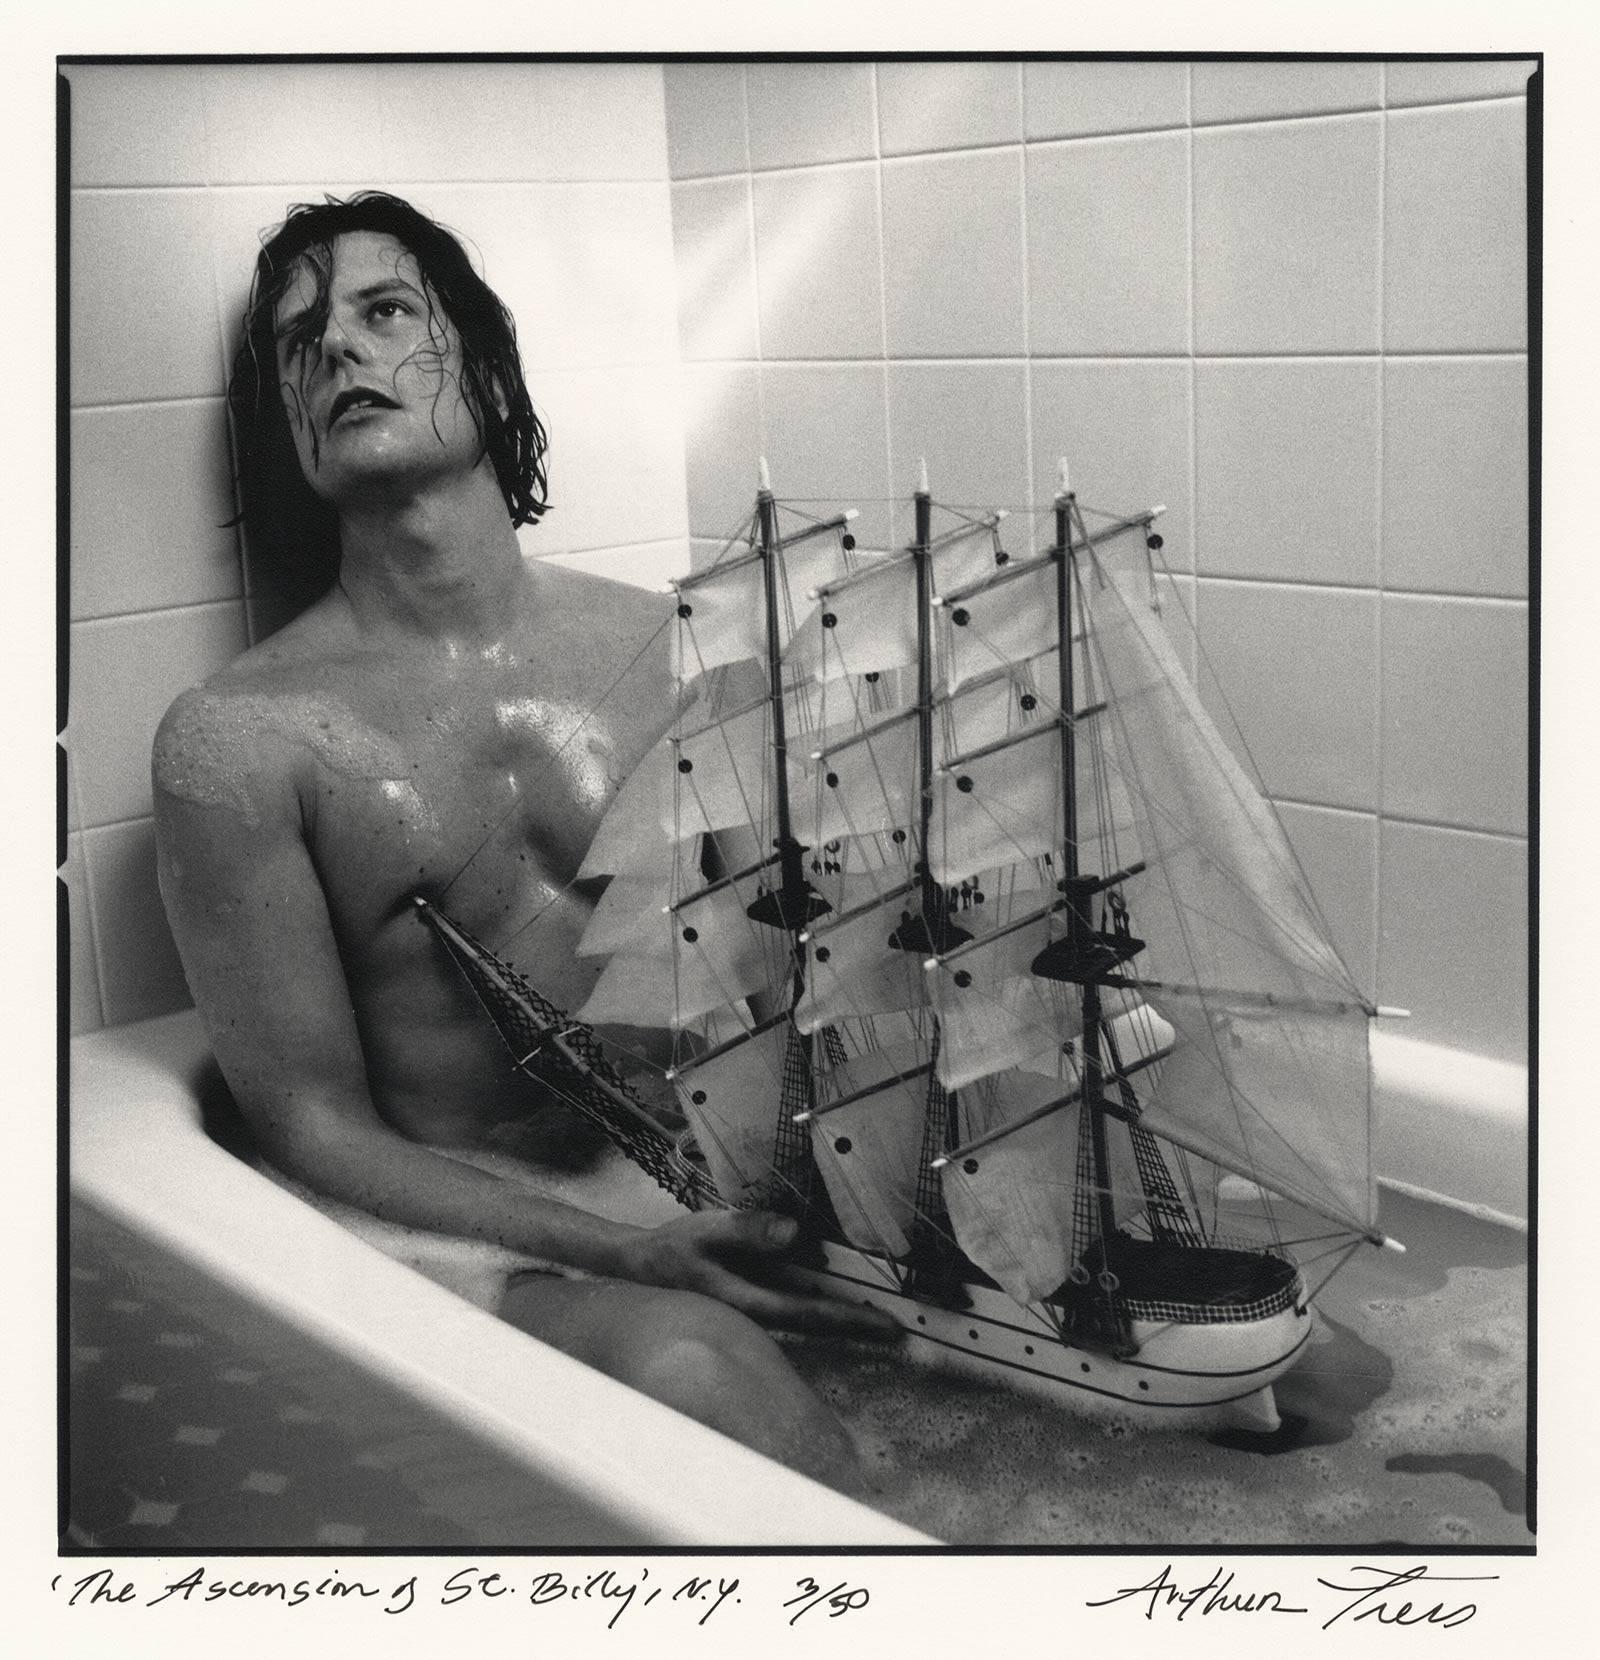 Arthur Tress Figurative Photograph - The Ascension of St. Billy's, NY (male nude soaks in tub as his boat comes)